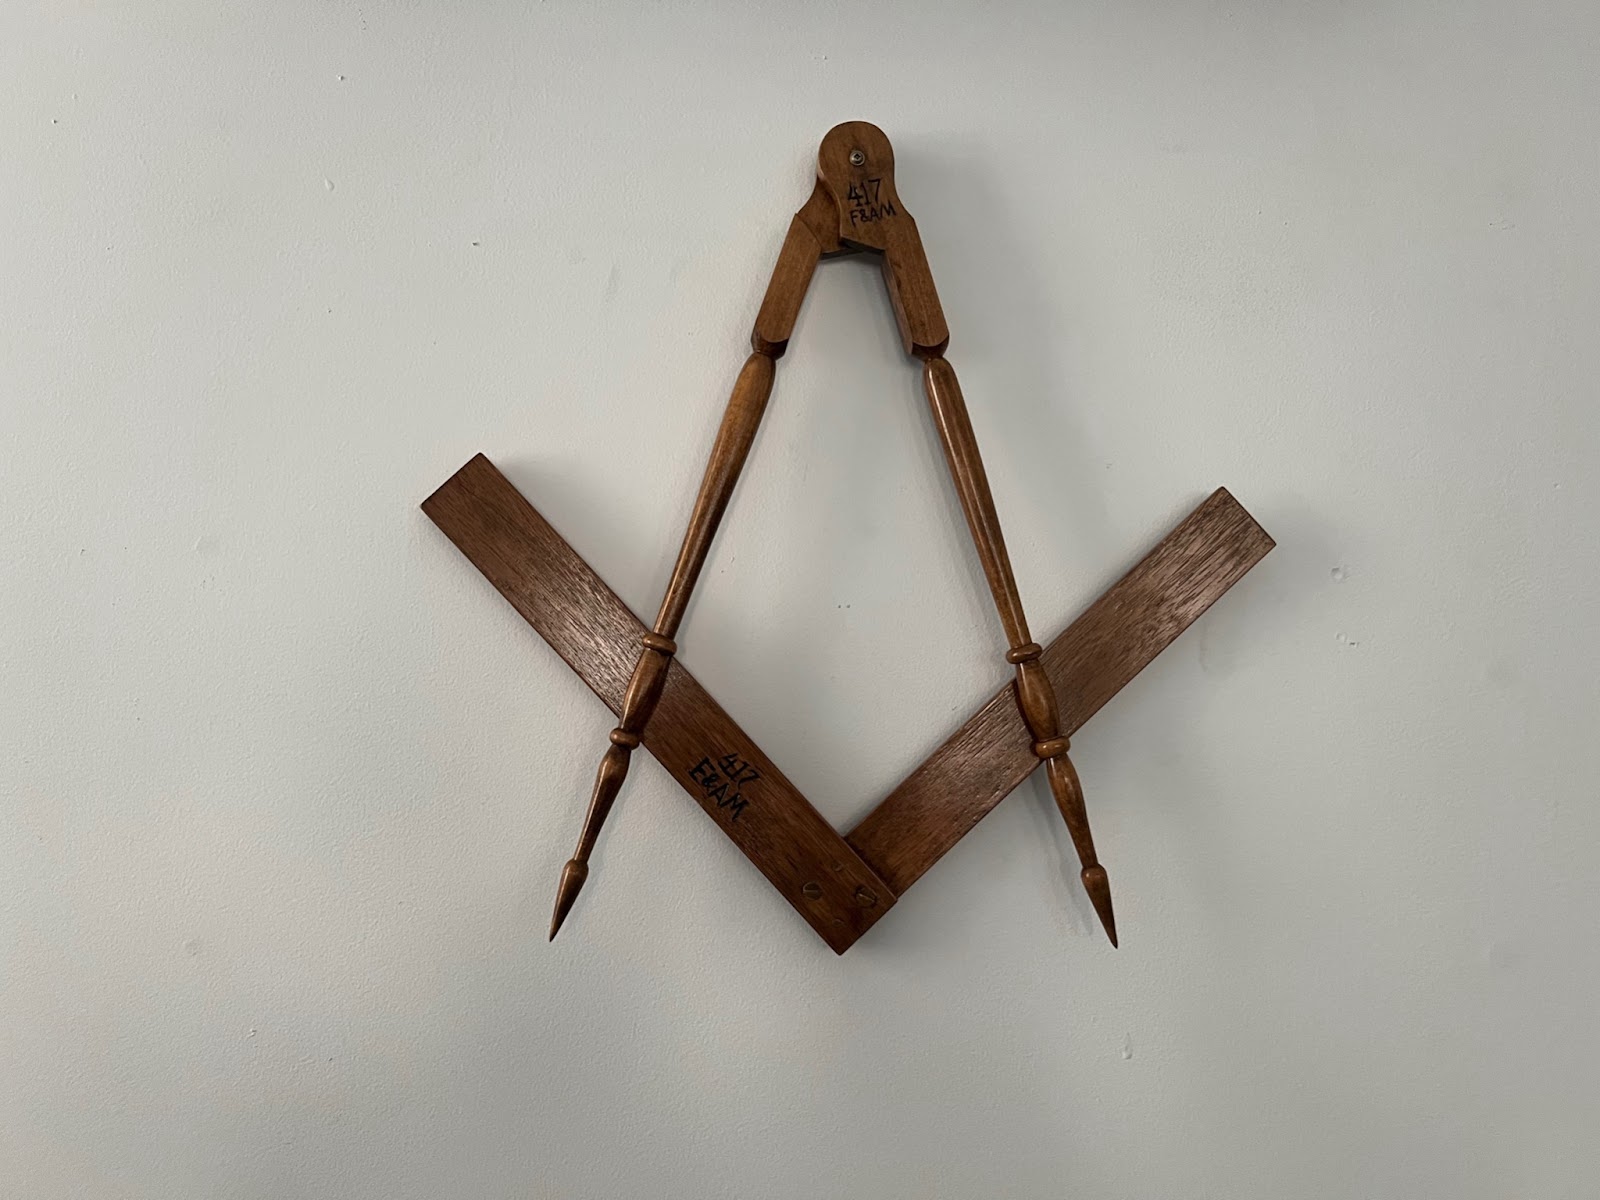 An image of the Masonic square and compass symbol.